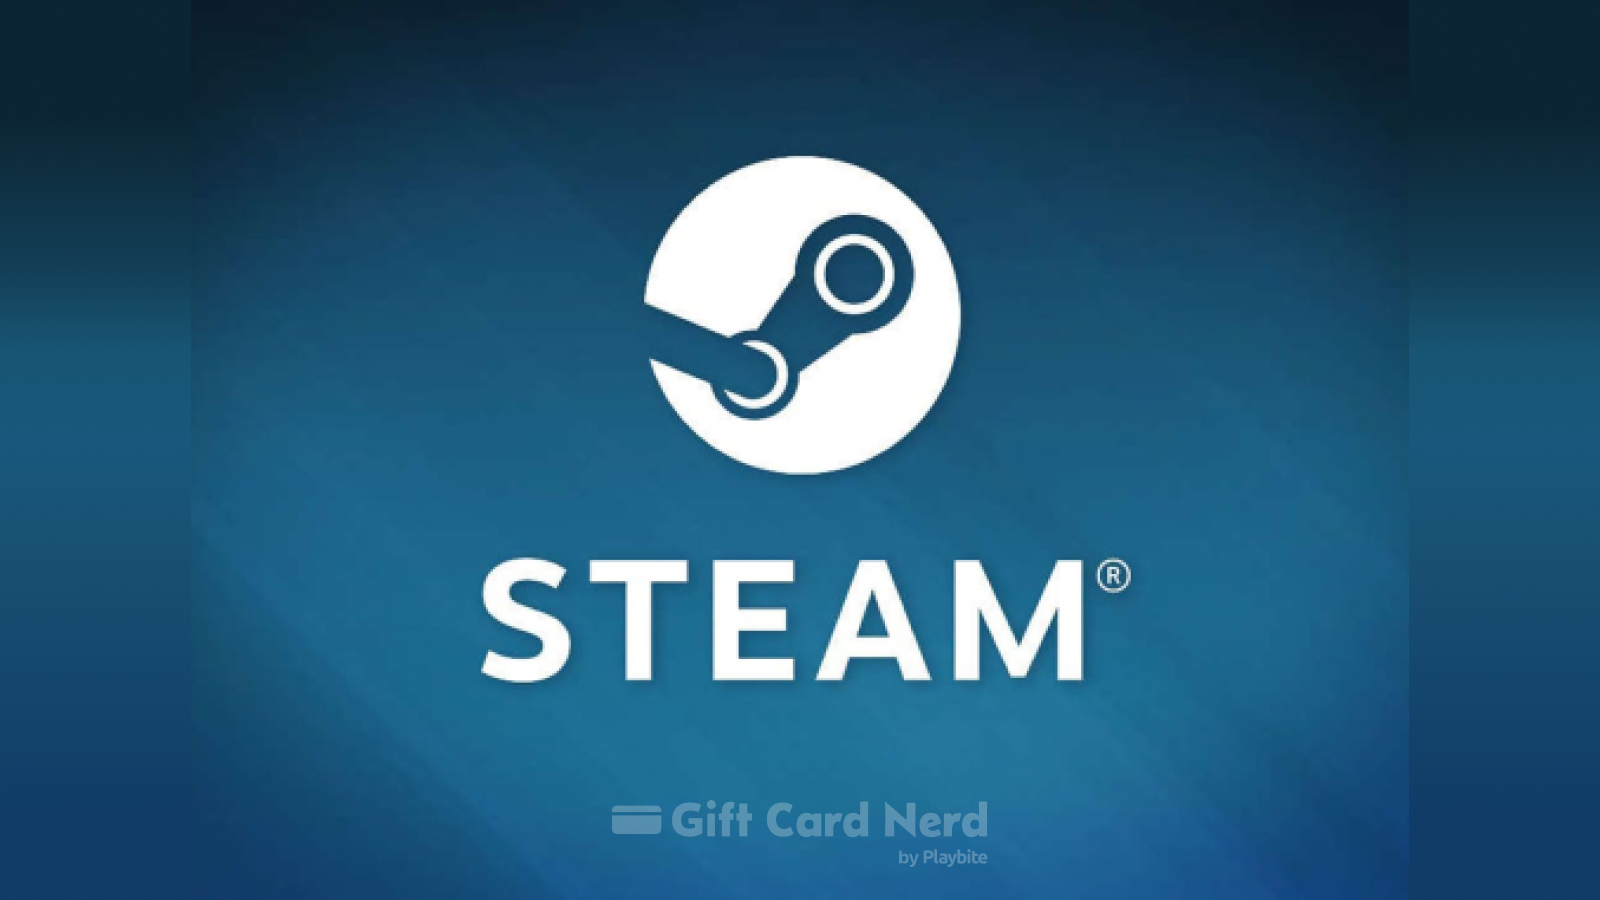 Can I Use a Steam Gift Card on Amazon?